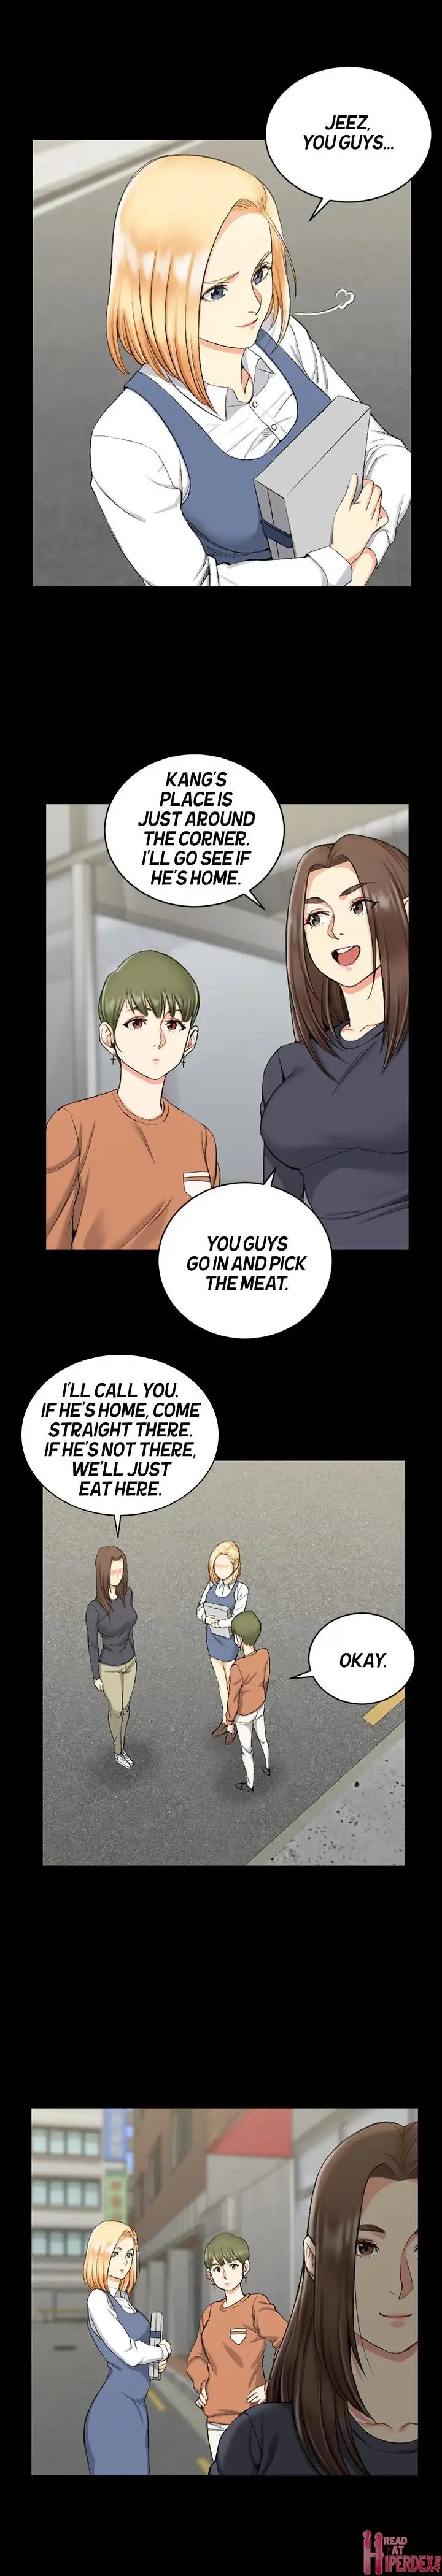 His Place - Chapter 54 Page 6